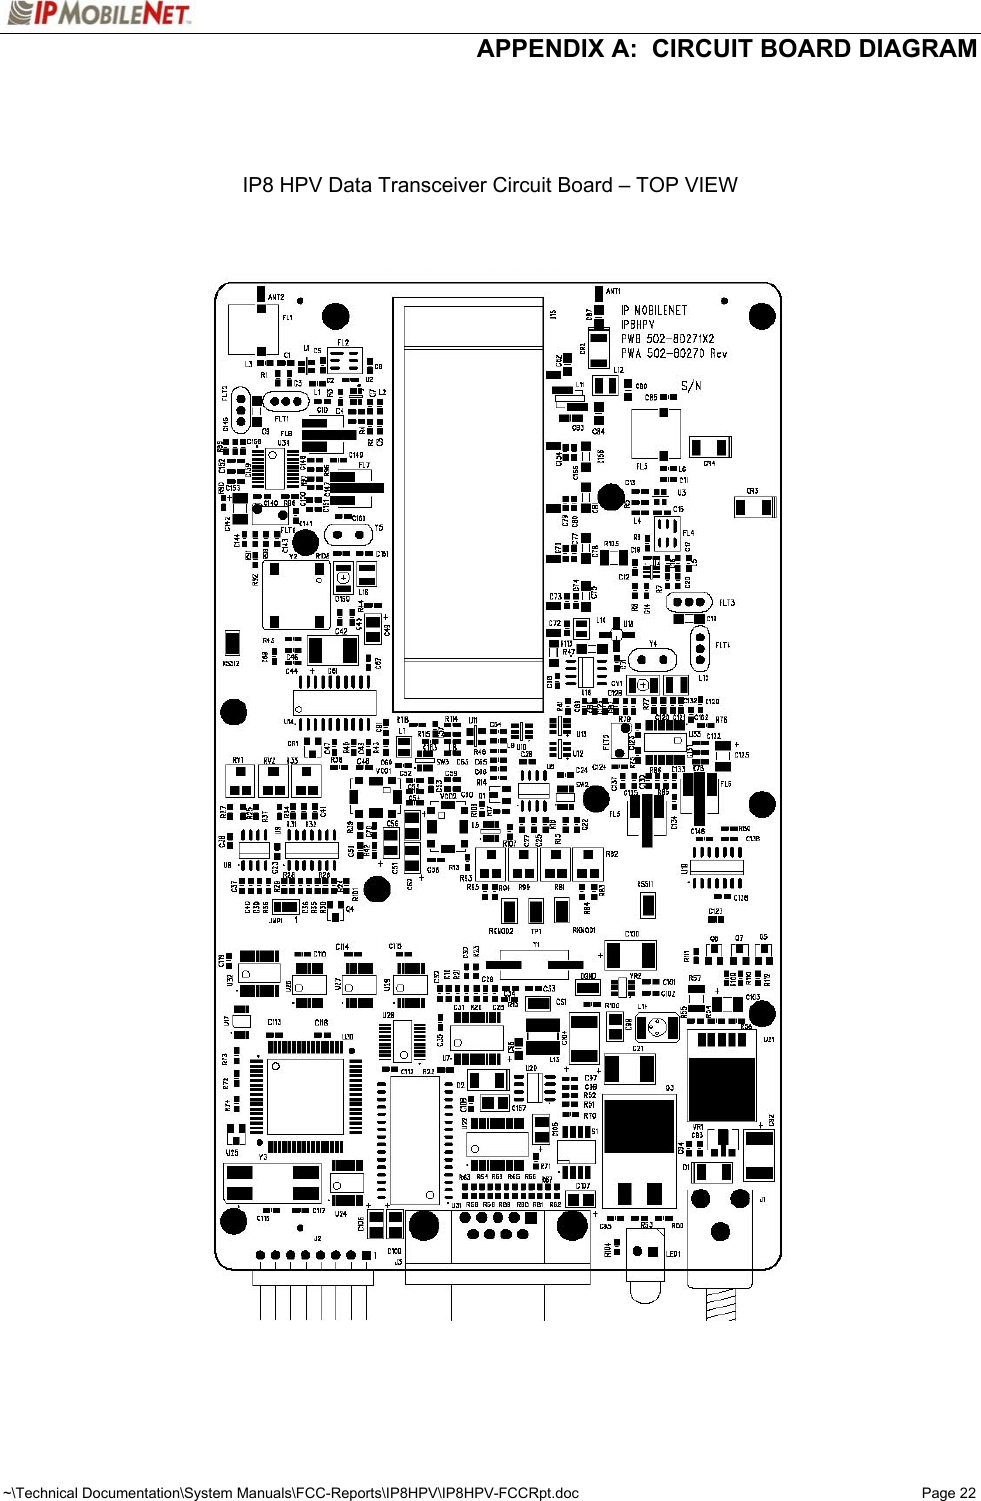  APPENDIX A:  CIRCUIT BOARD DIAGRAM ~\Technical Documentation\System Manuals\FCC-Reports\IP8HPV\IP8HPV-FCCRpt.doc  Page 22     IP8 HPV Data Transceiver Circuit Board – TOP VIEW     